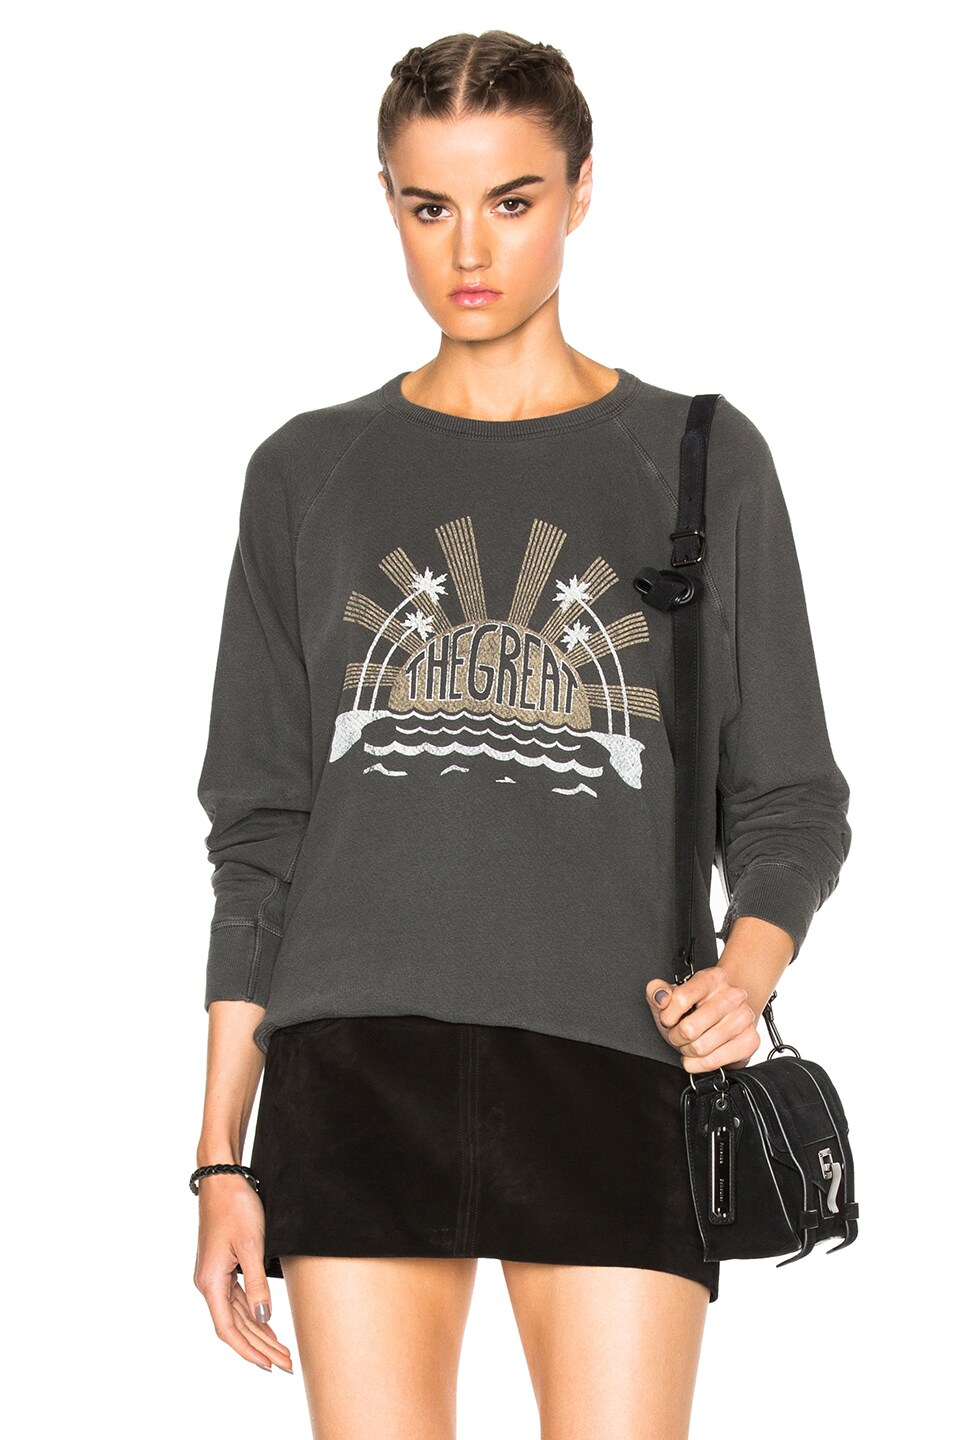 Image 1 of The Great Palm Sweatshirt in Washed Black With Caper Print